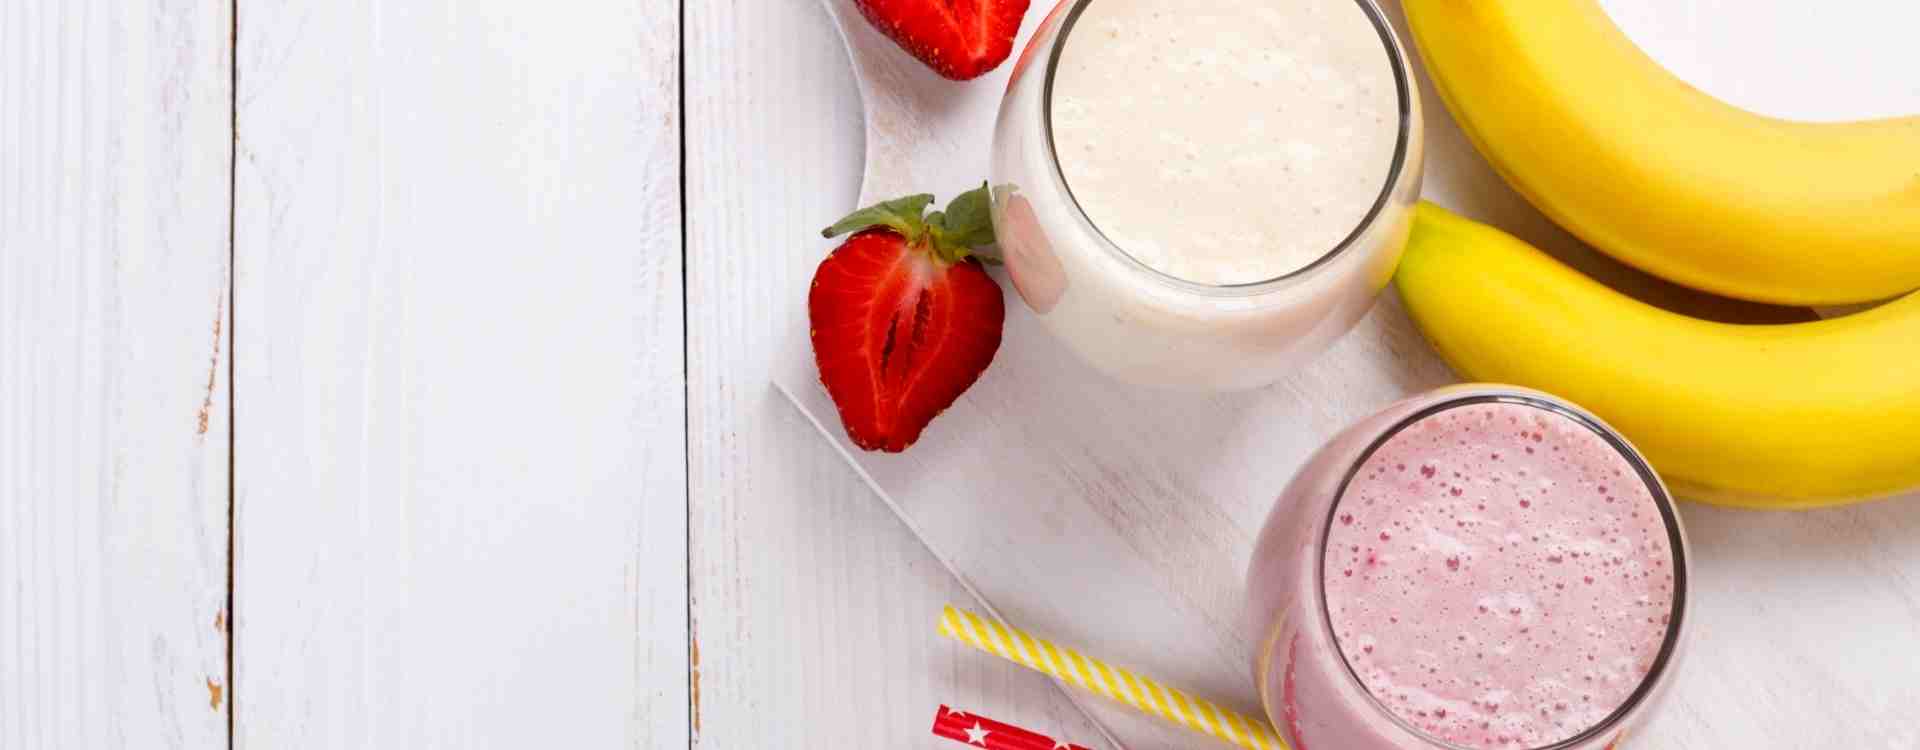 alt=“Strawberries and banana smoothies from a bird’s eye view”